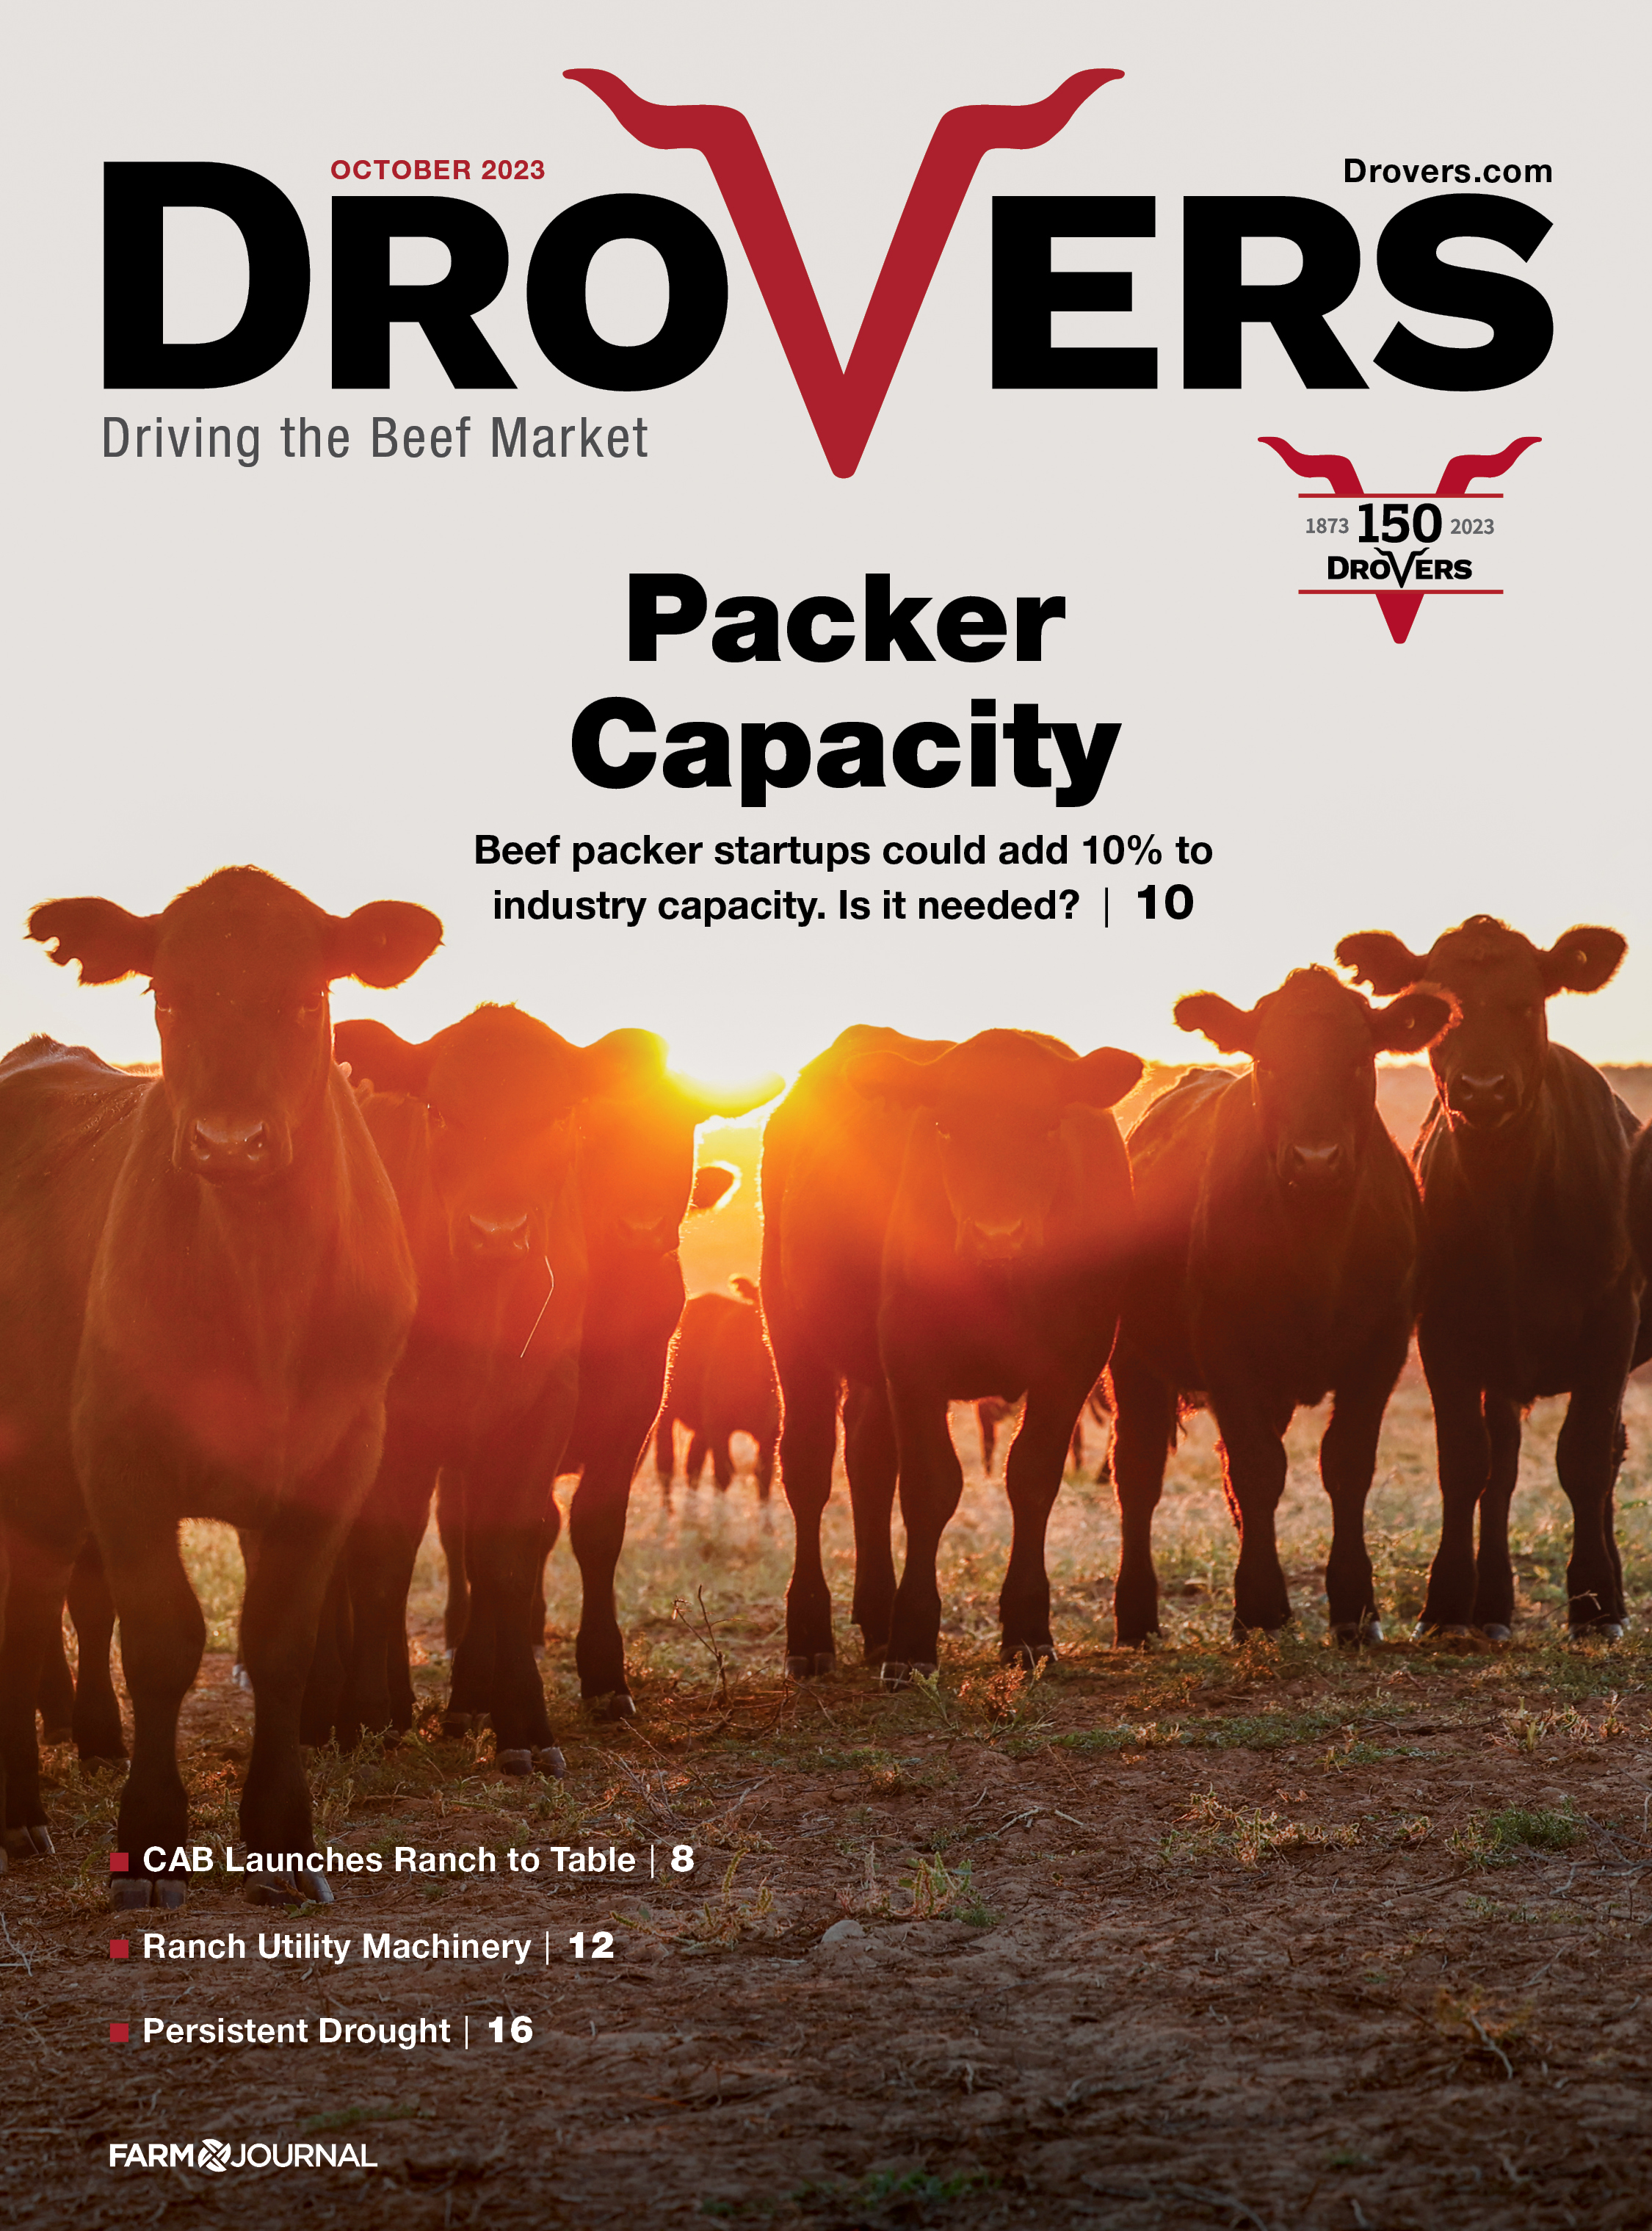  Drovers - October 2023 Cover 